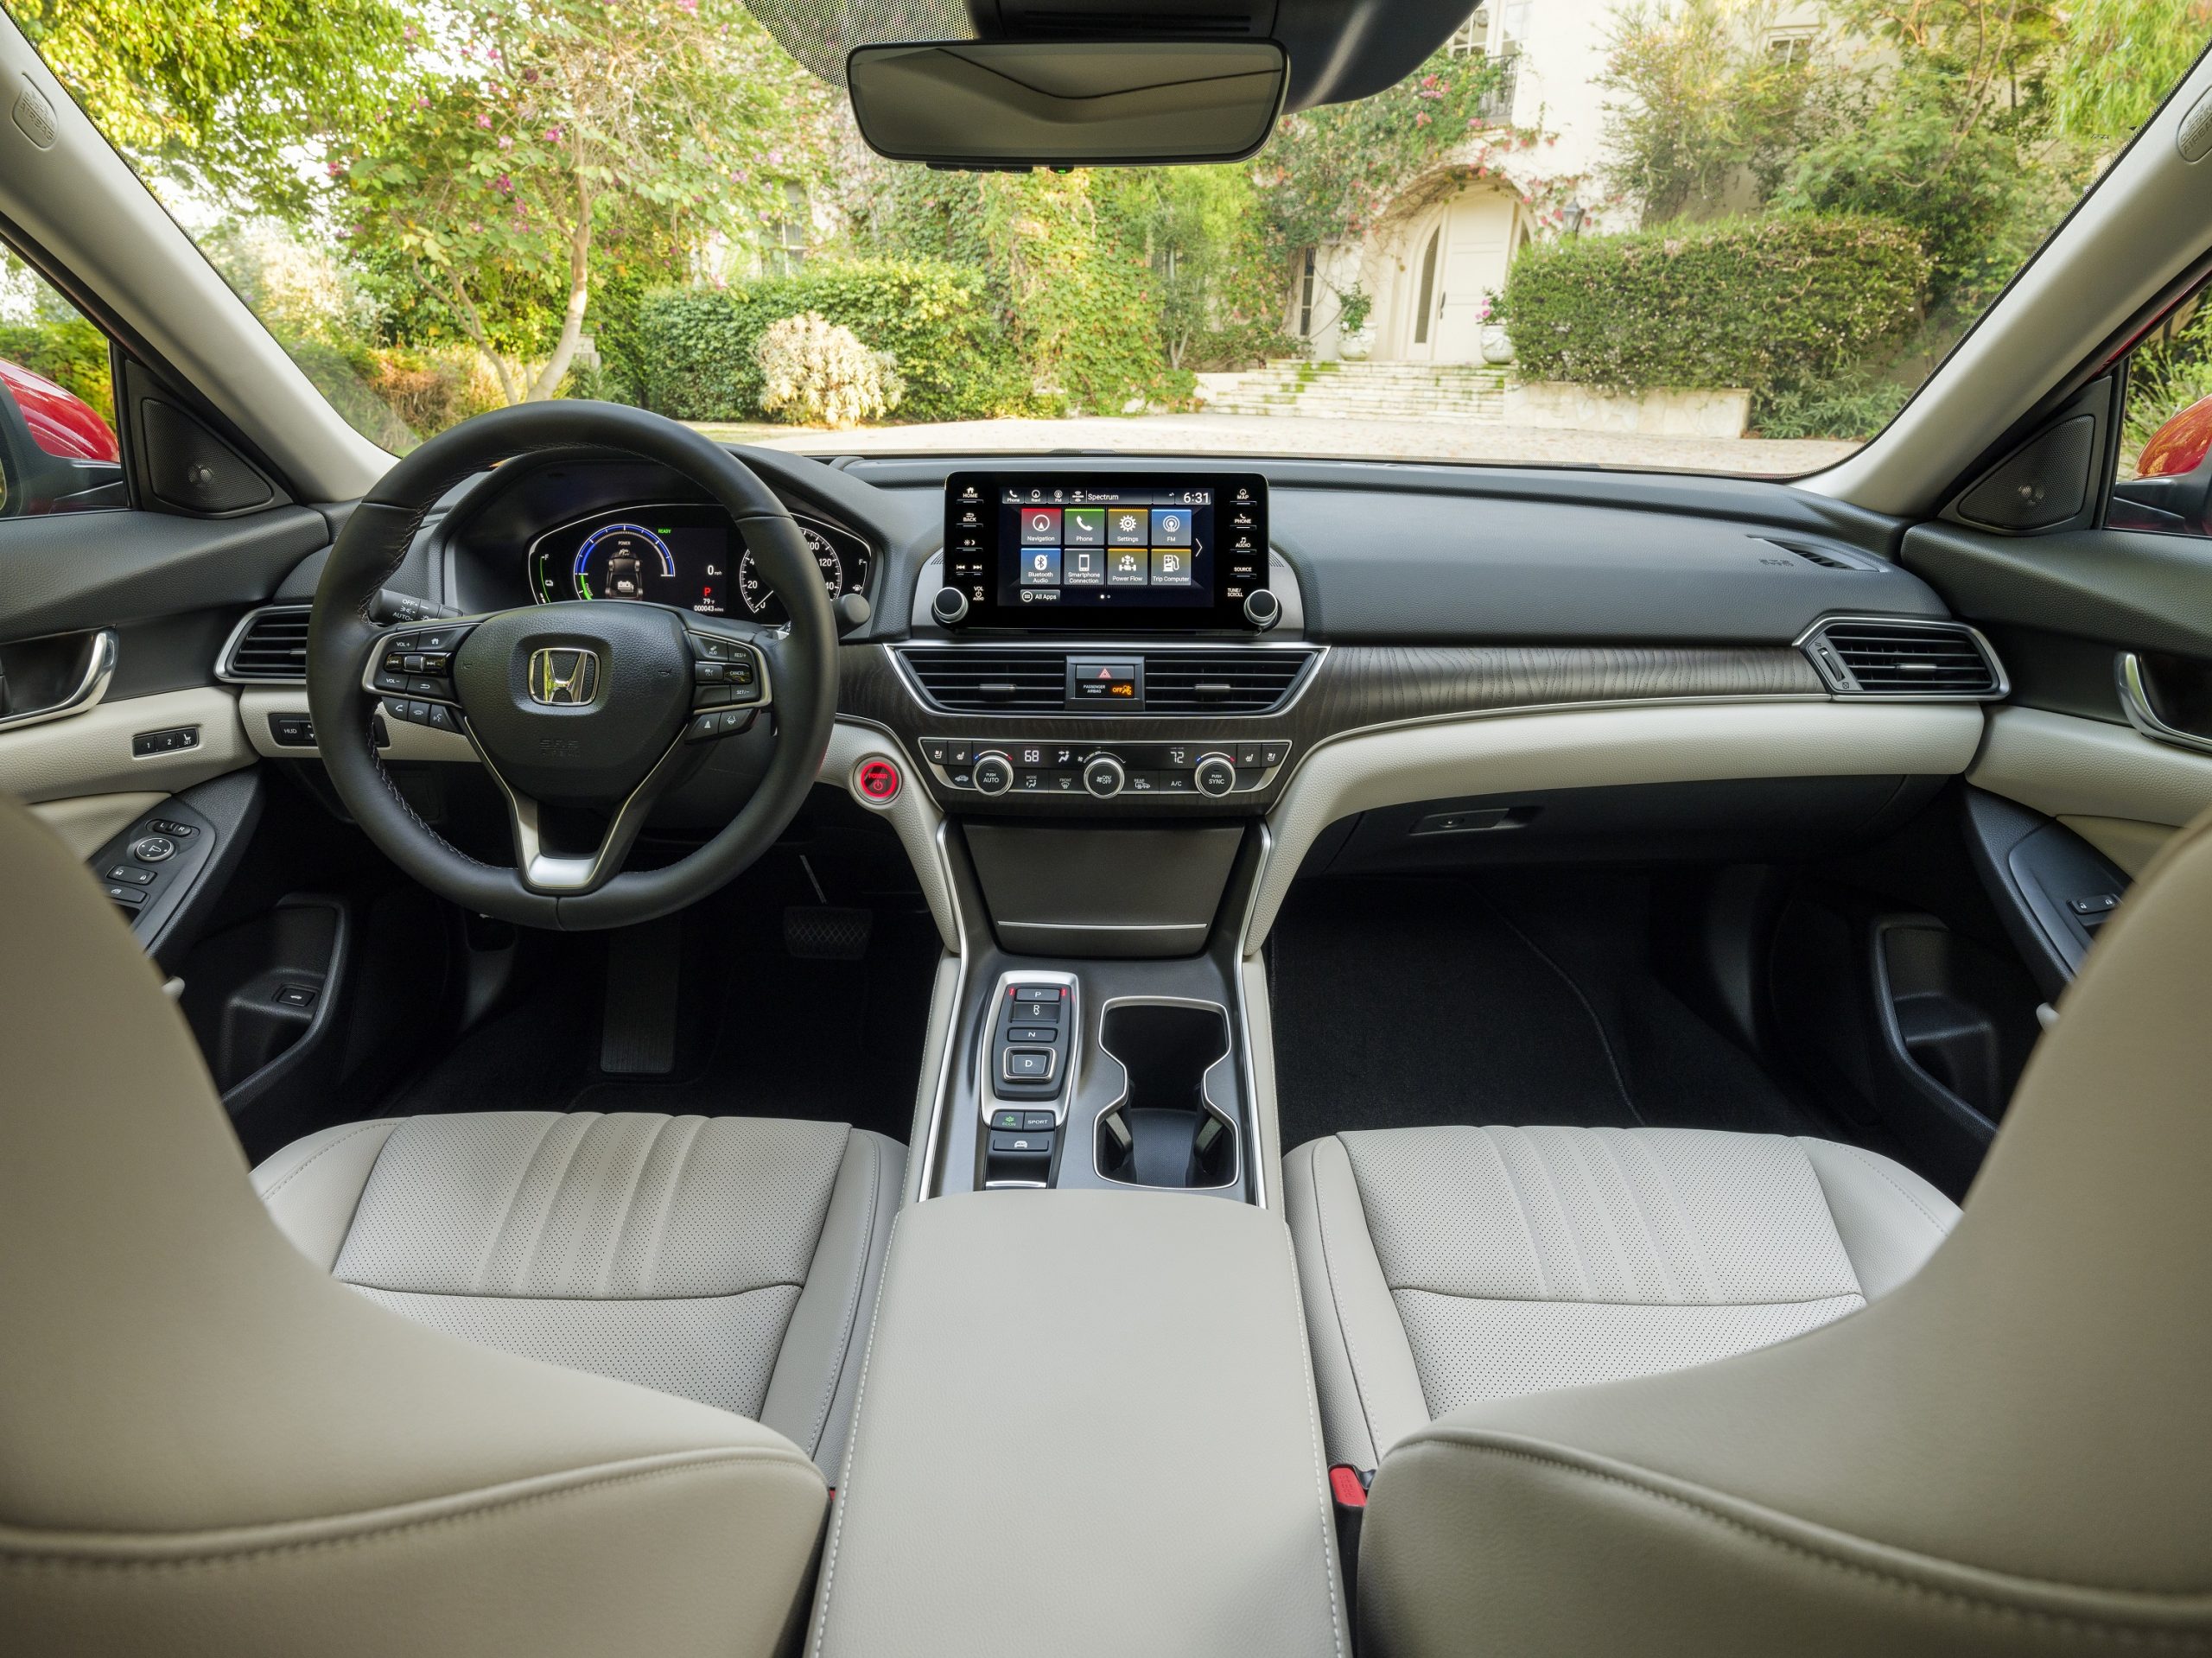 The interior of the 2022 Honda Accord in beige